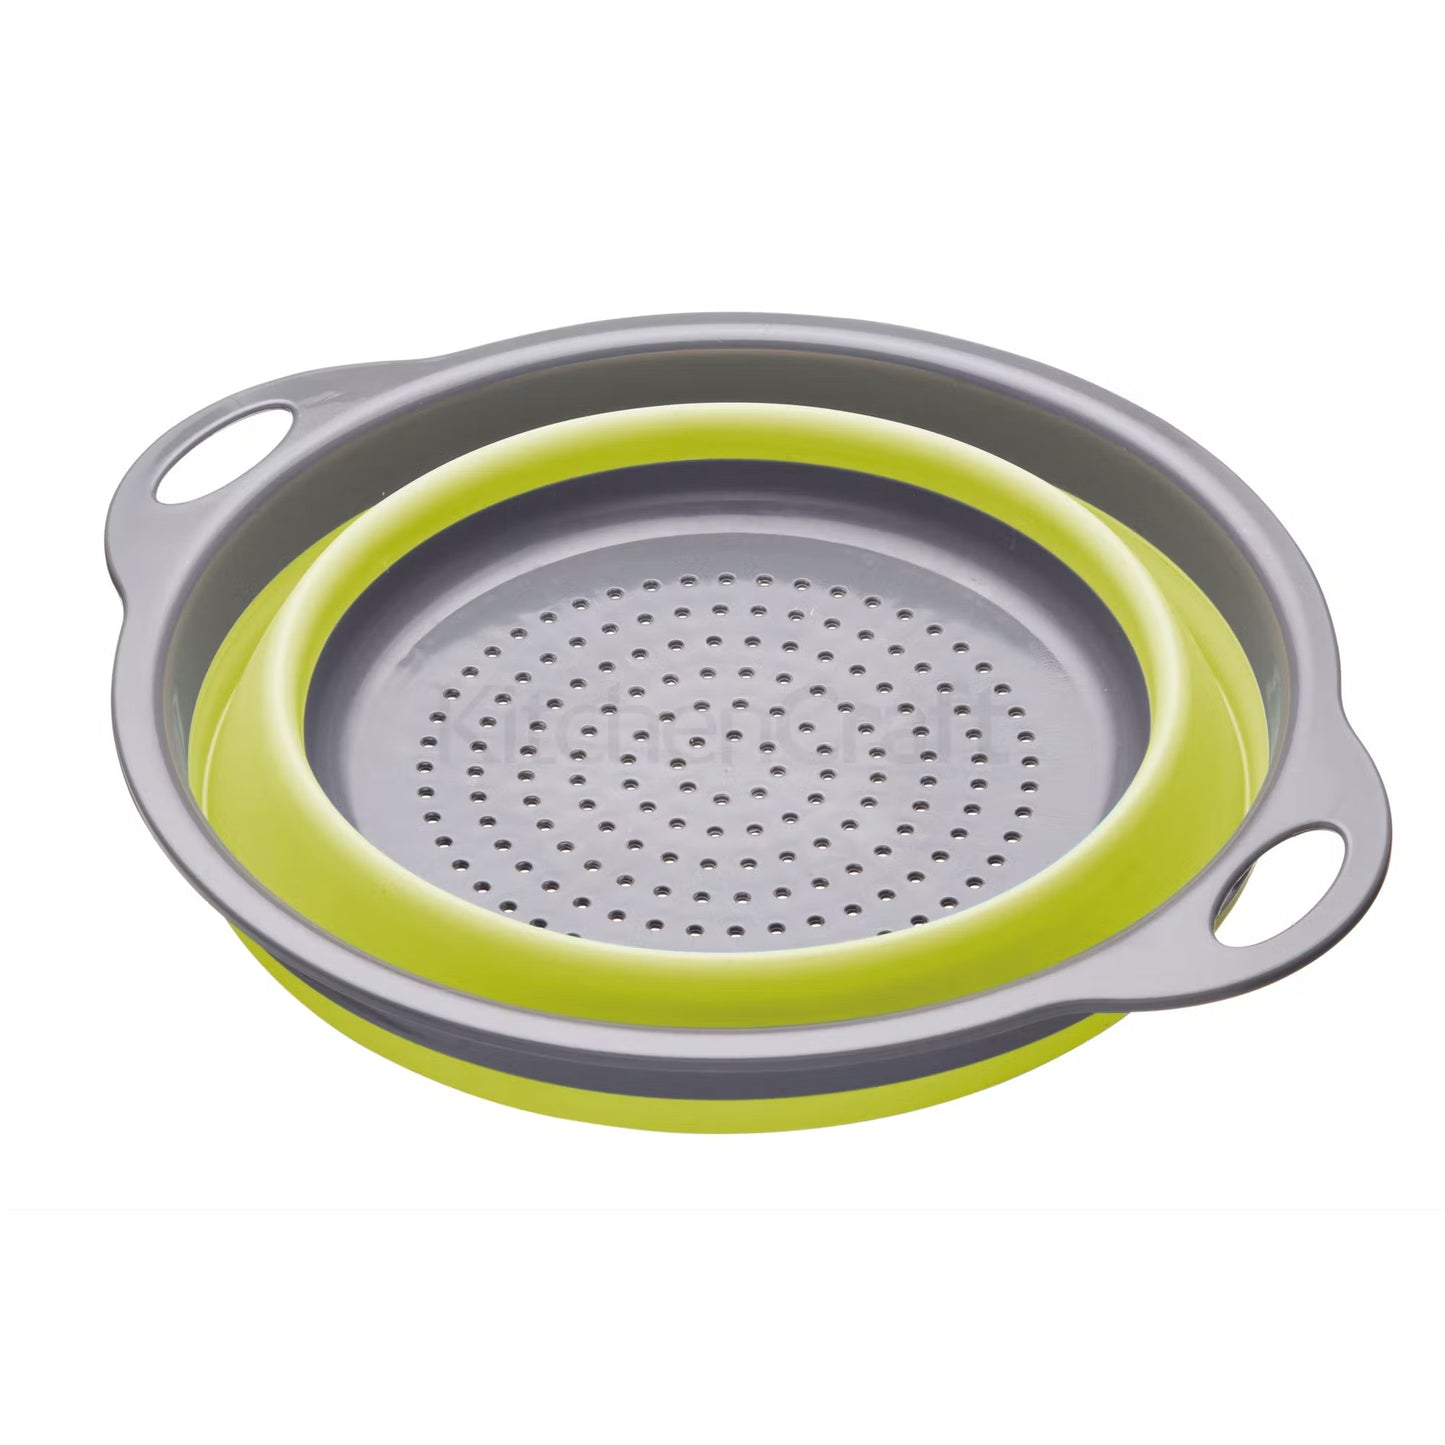 KitchenCraft Colourworks Green Collapsible Colander with Handles CWGCOLGRN